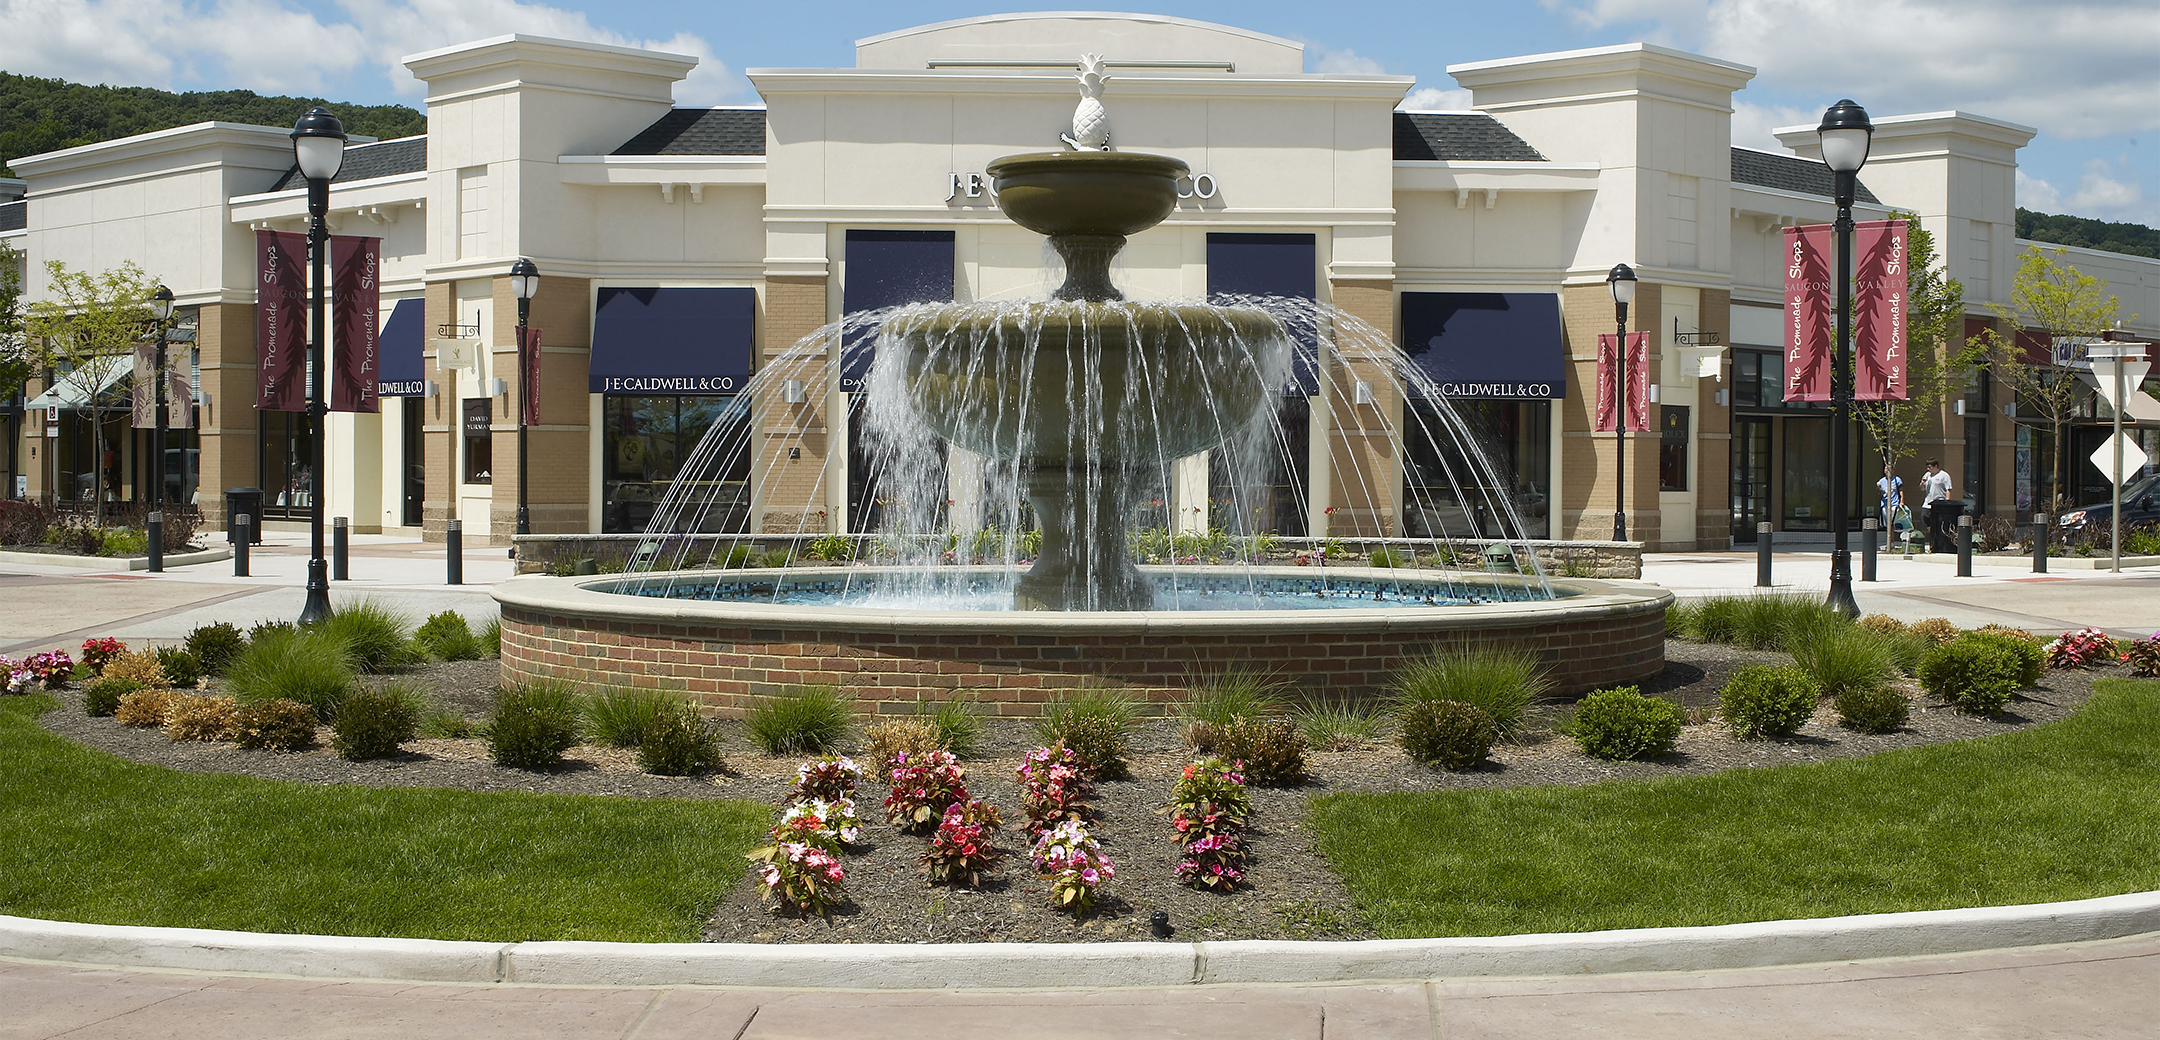 A close up exterior view of the Promenade Saucon Valley main square fountain with a grass and bush landscape encircling it with the building in the background.